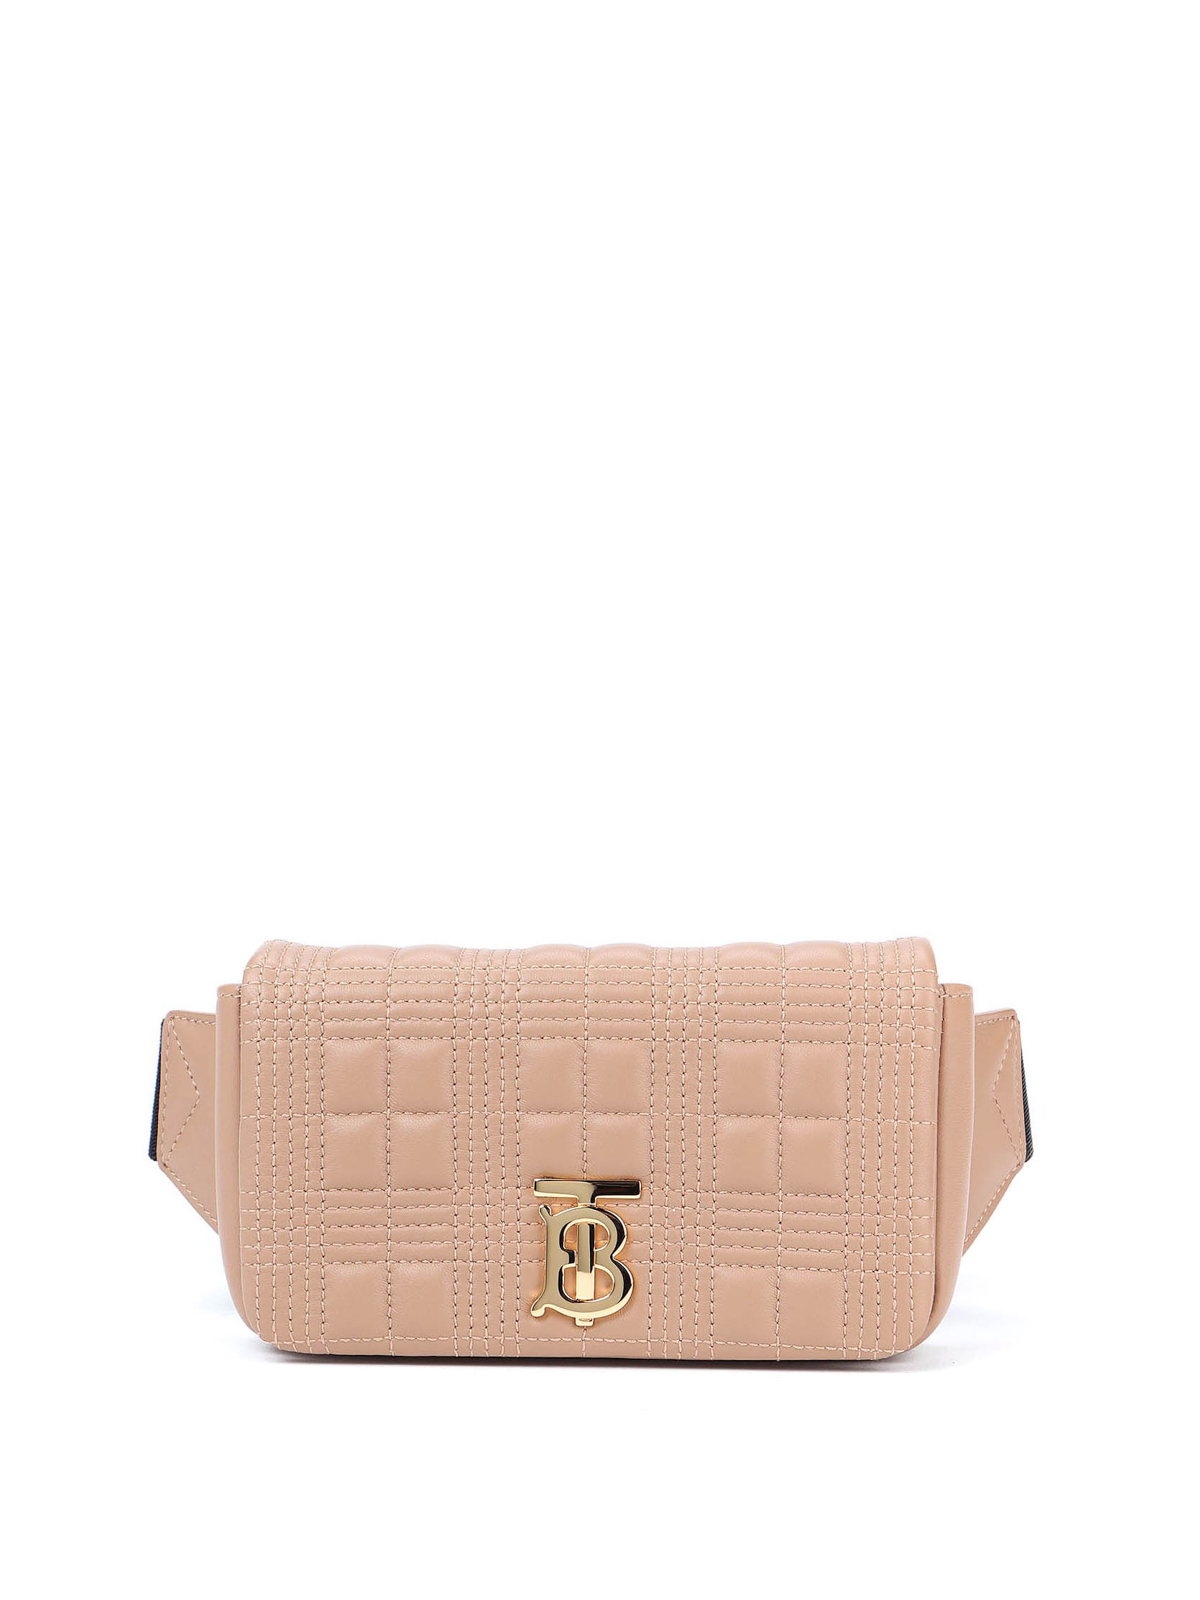 BURBERRY: Bum belt bag in E-canvas with logo - Brown